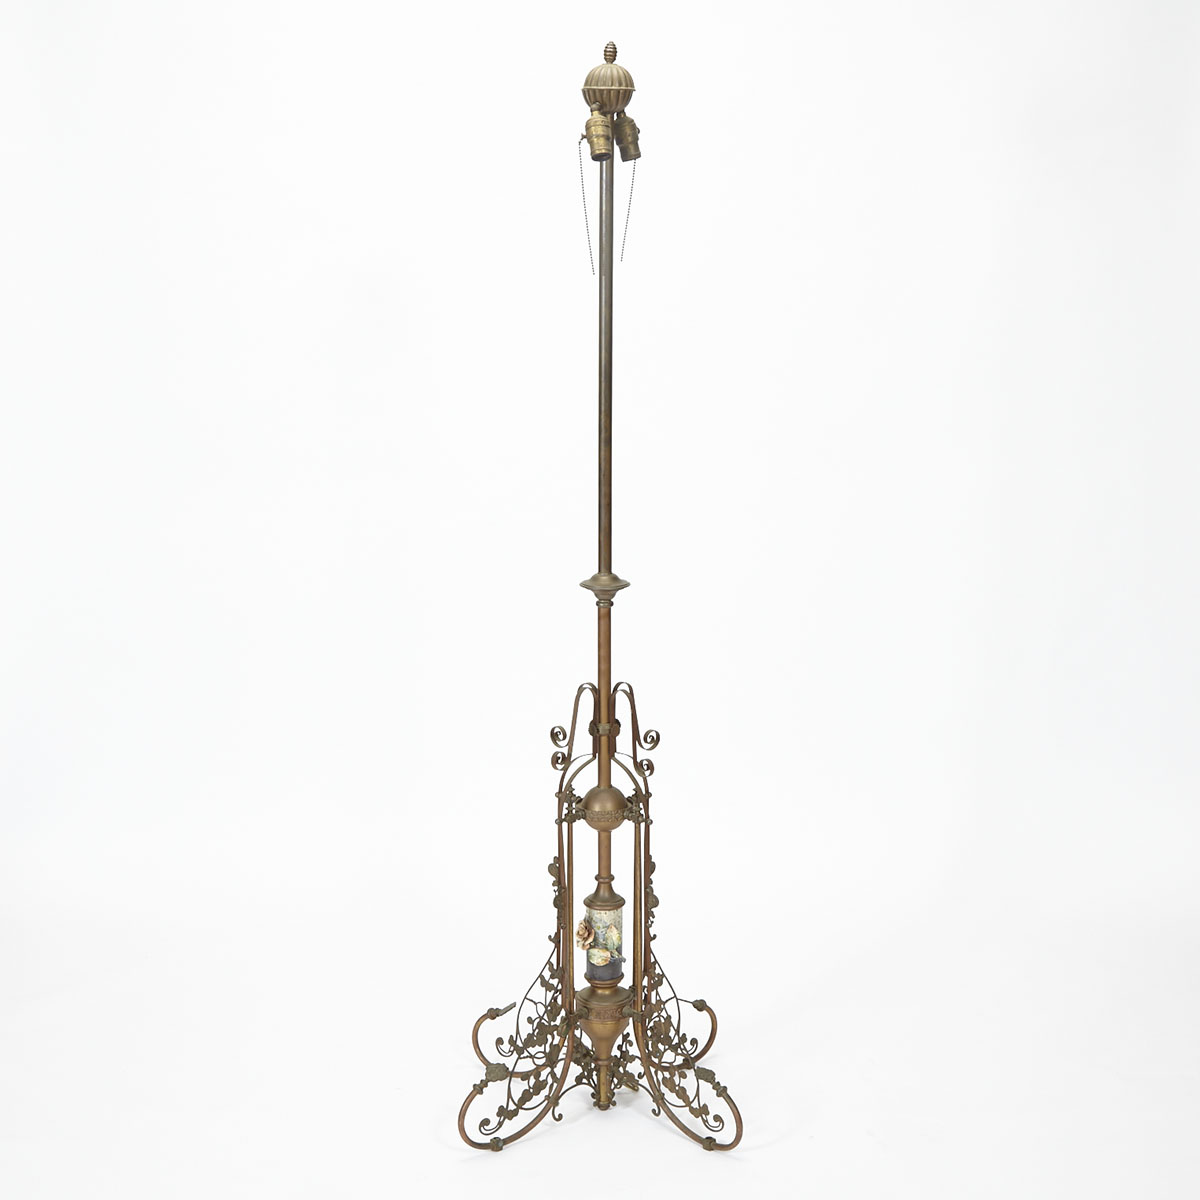 Late Victorian Porcelain Mounted Gilt Metal Floor Lamp, Late 19th century